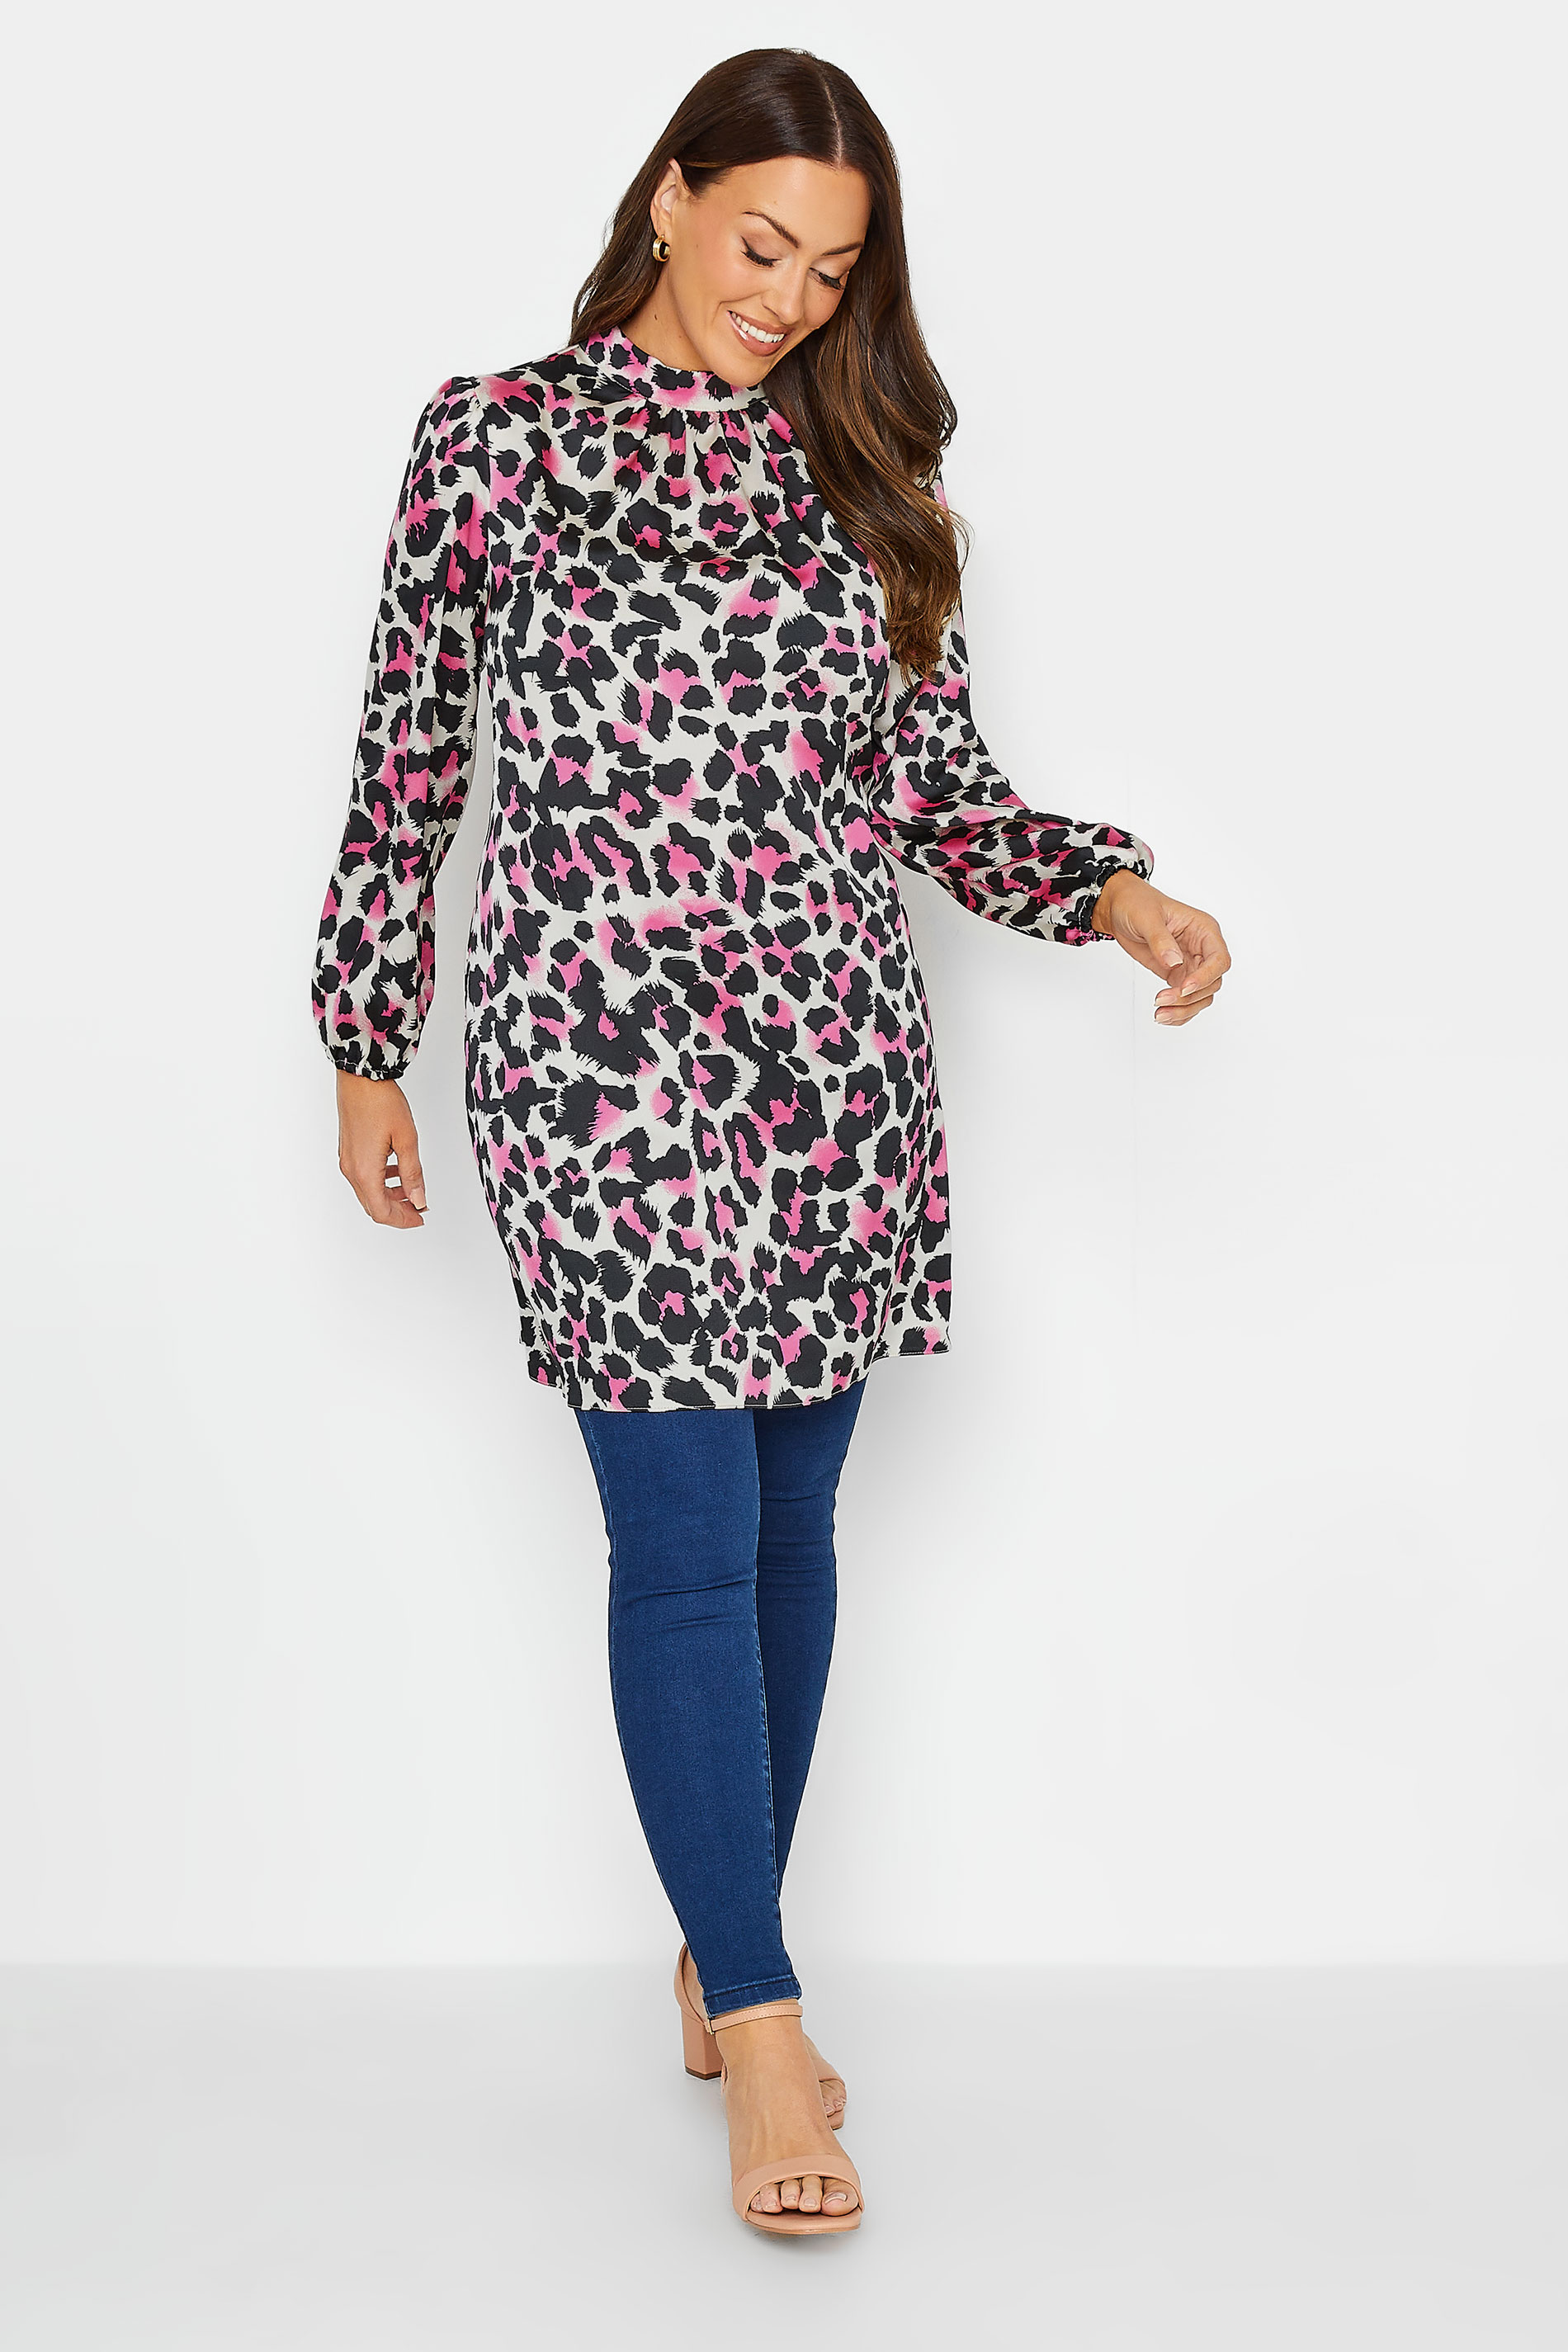 M&Co Pink Leopard Print High Neck Tunic Top | M&Co  2